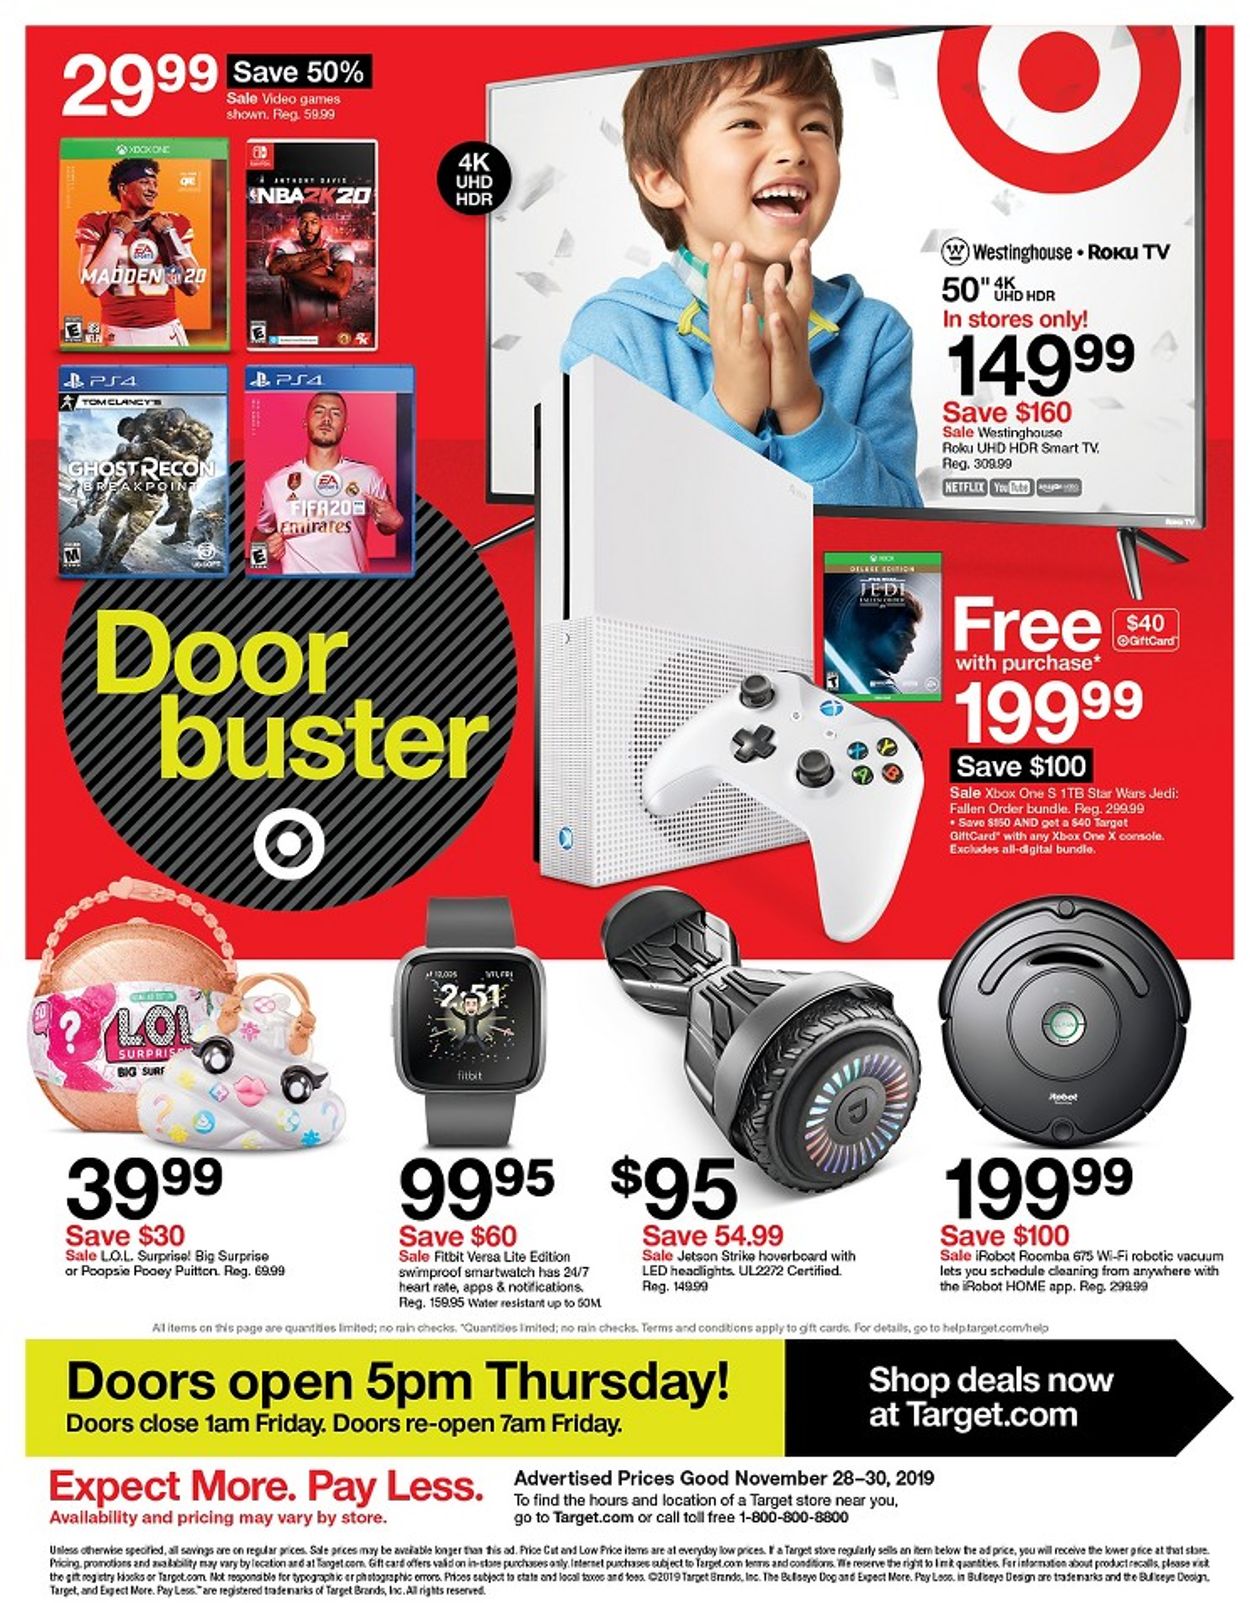 Target - Black Friday Ad 2019 Current weekly ad 11/28 - 11/30/2019 [54 - What Are The Targe Deals Black Friday